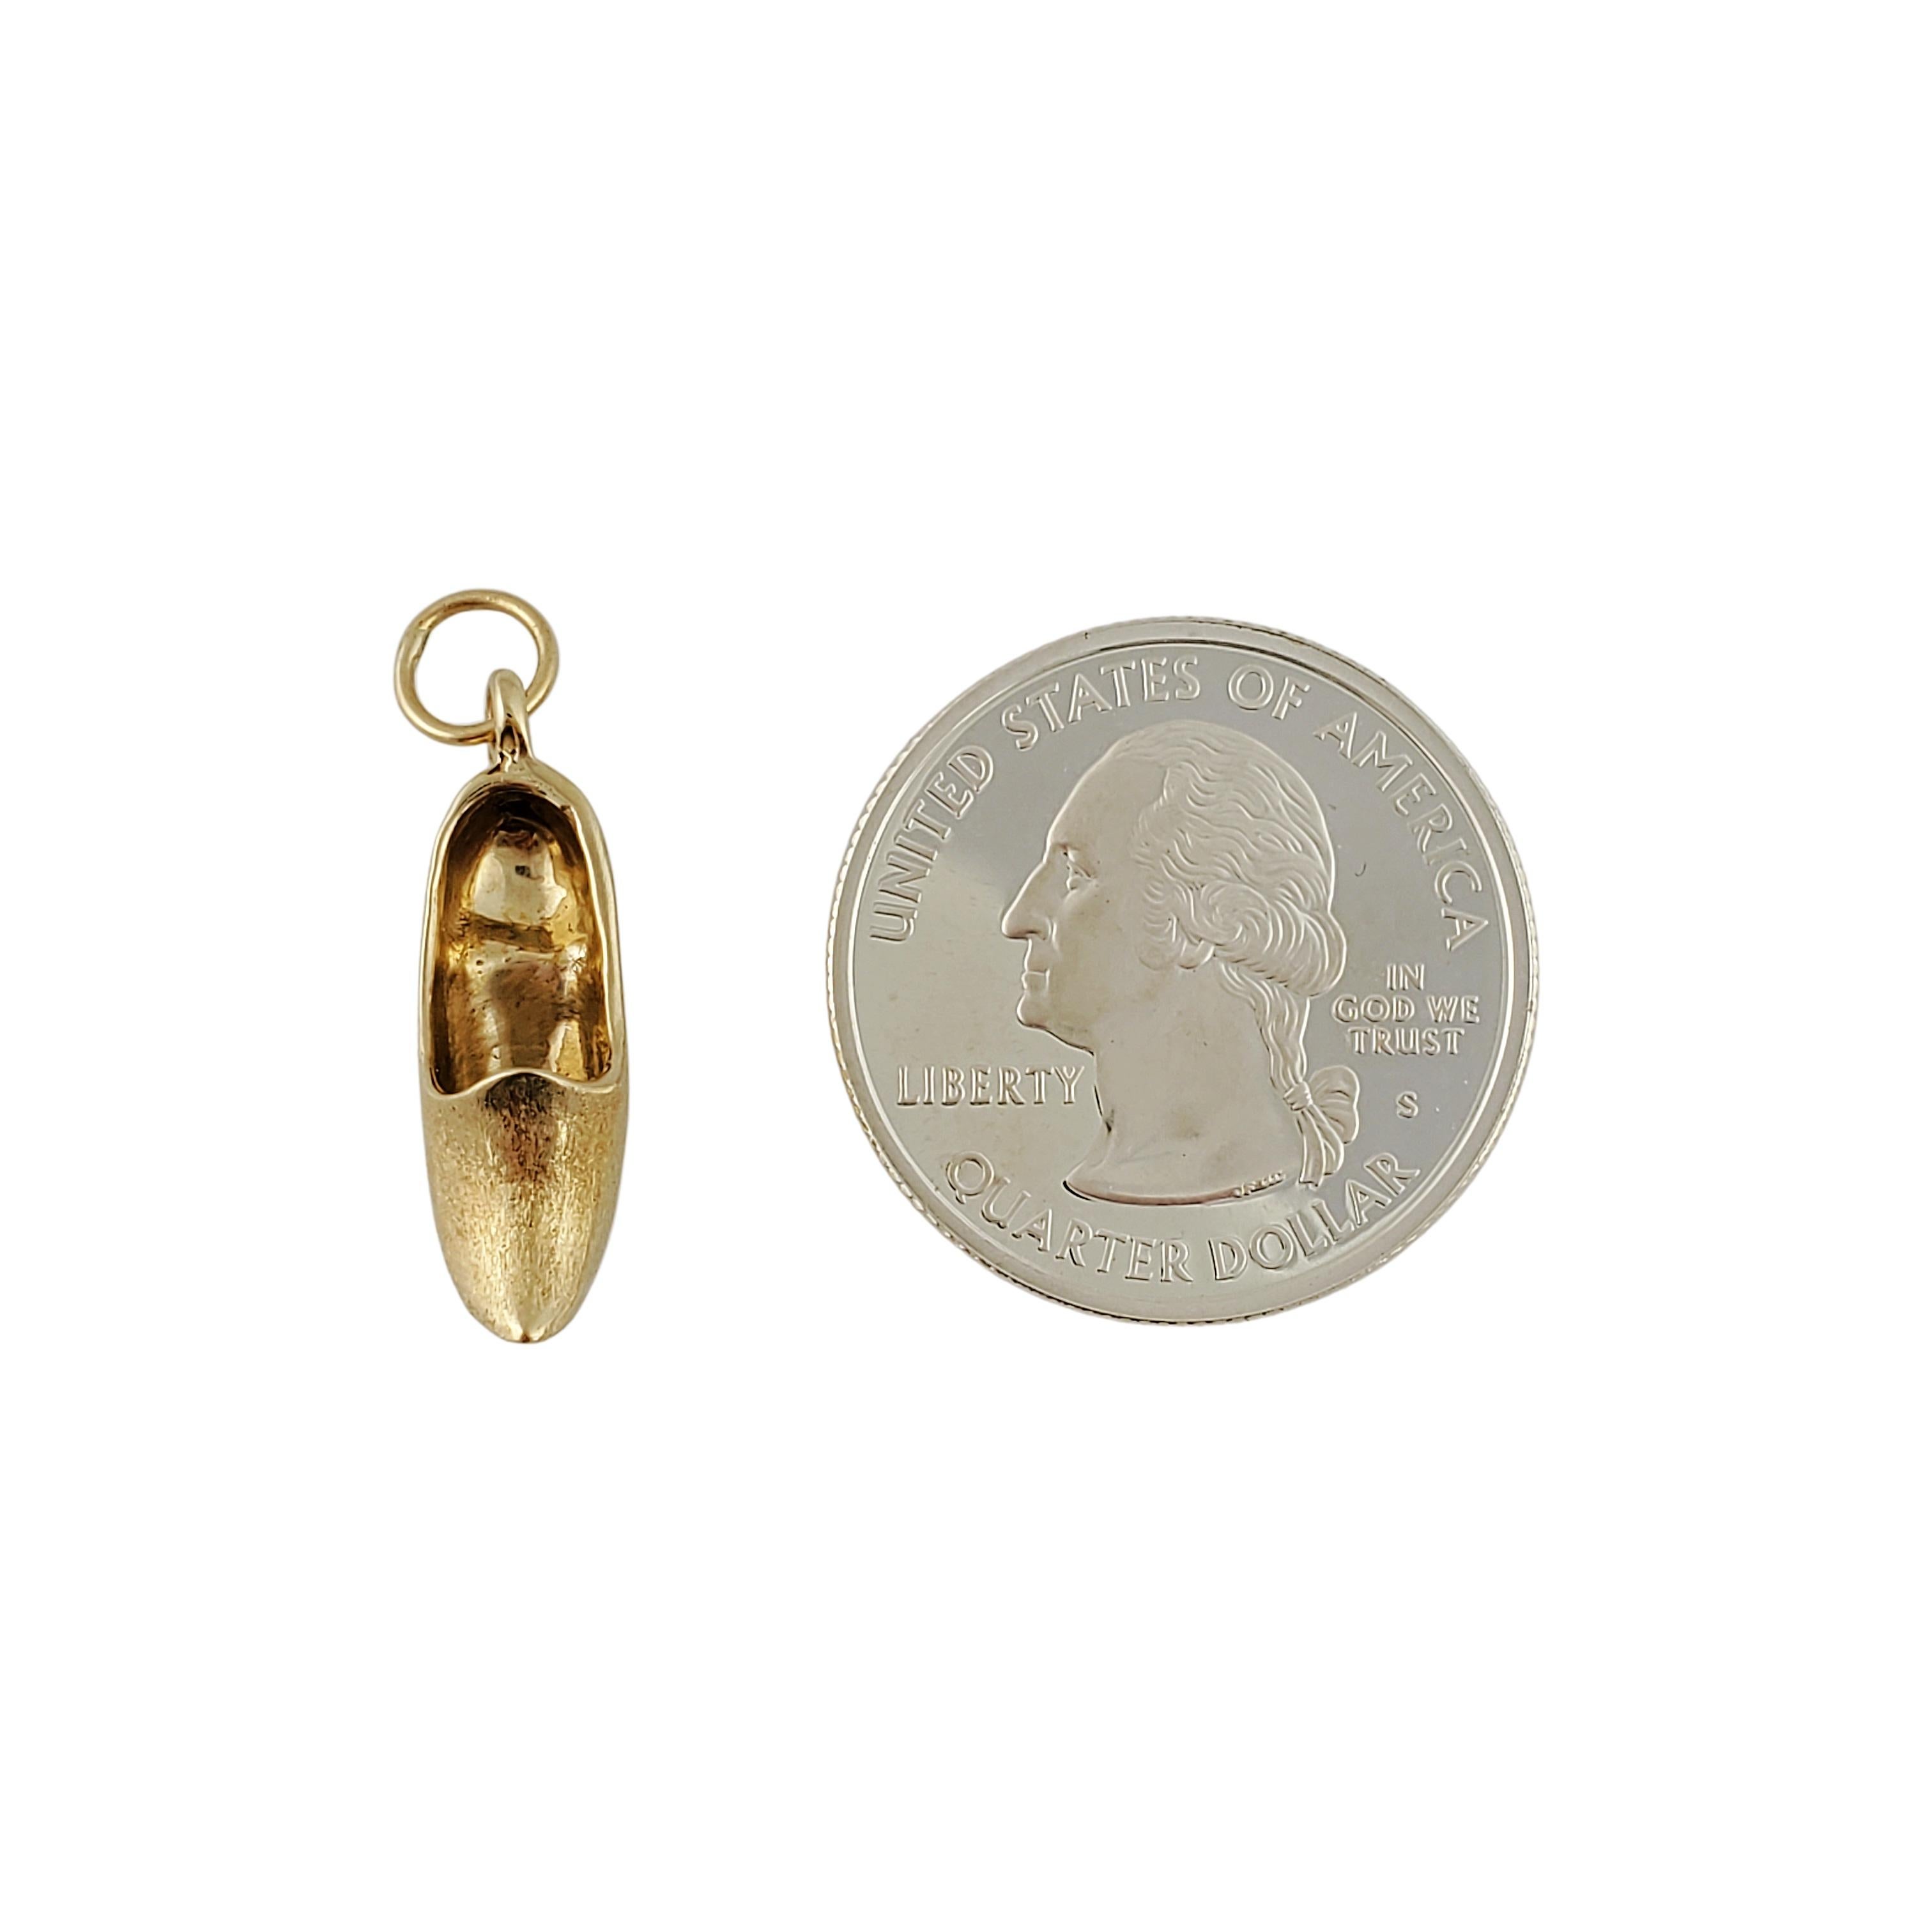 Vintage 14 Karat Yellow Gold Dutch Shoe Charm

Adorable dutch shoe charm made of 14K yellow gold. 

*Chain not included

Size: 20 mm x 9.9 mm (actual charm)

Weight: 1.4 dwt / 2.2 g.

Hallmark: 14K

Very good condition, professionally